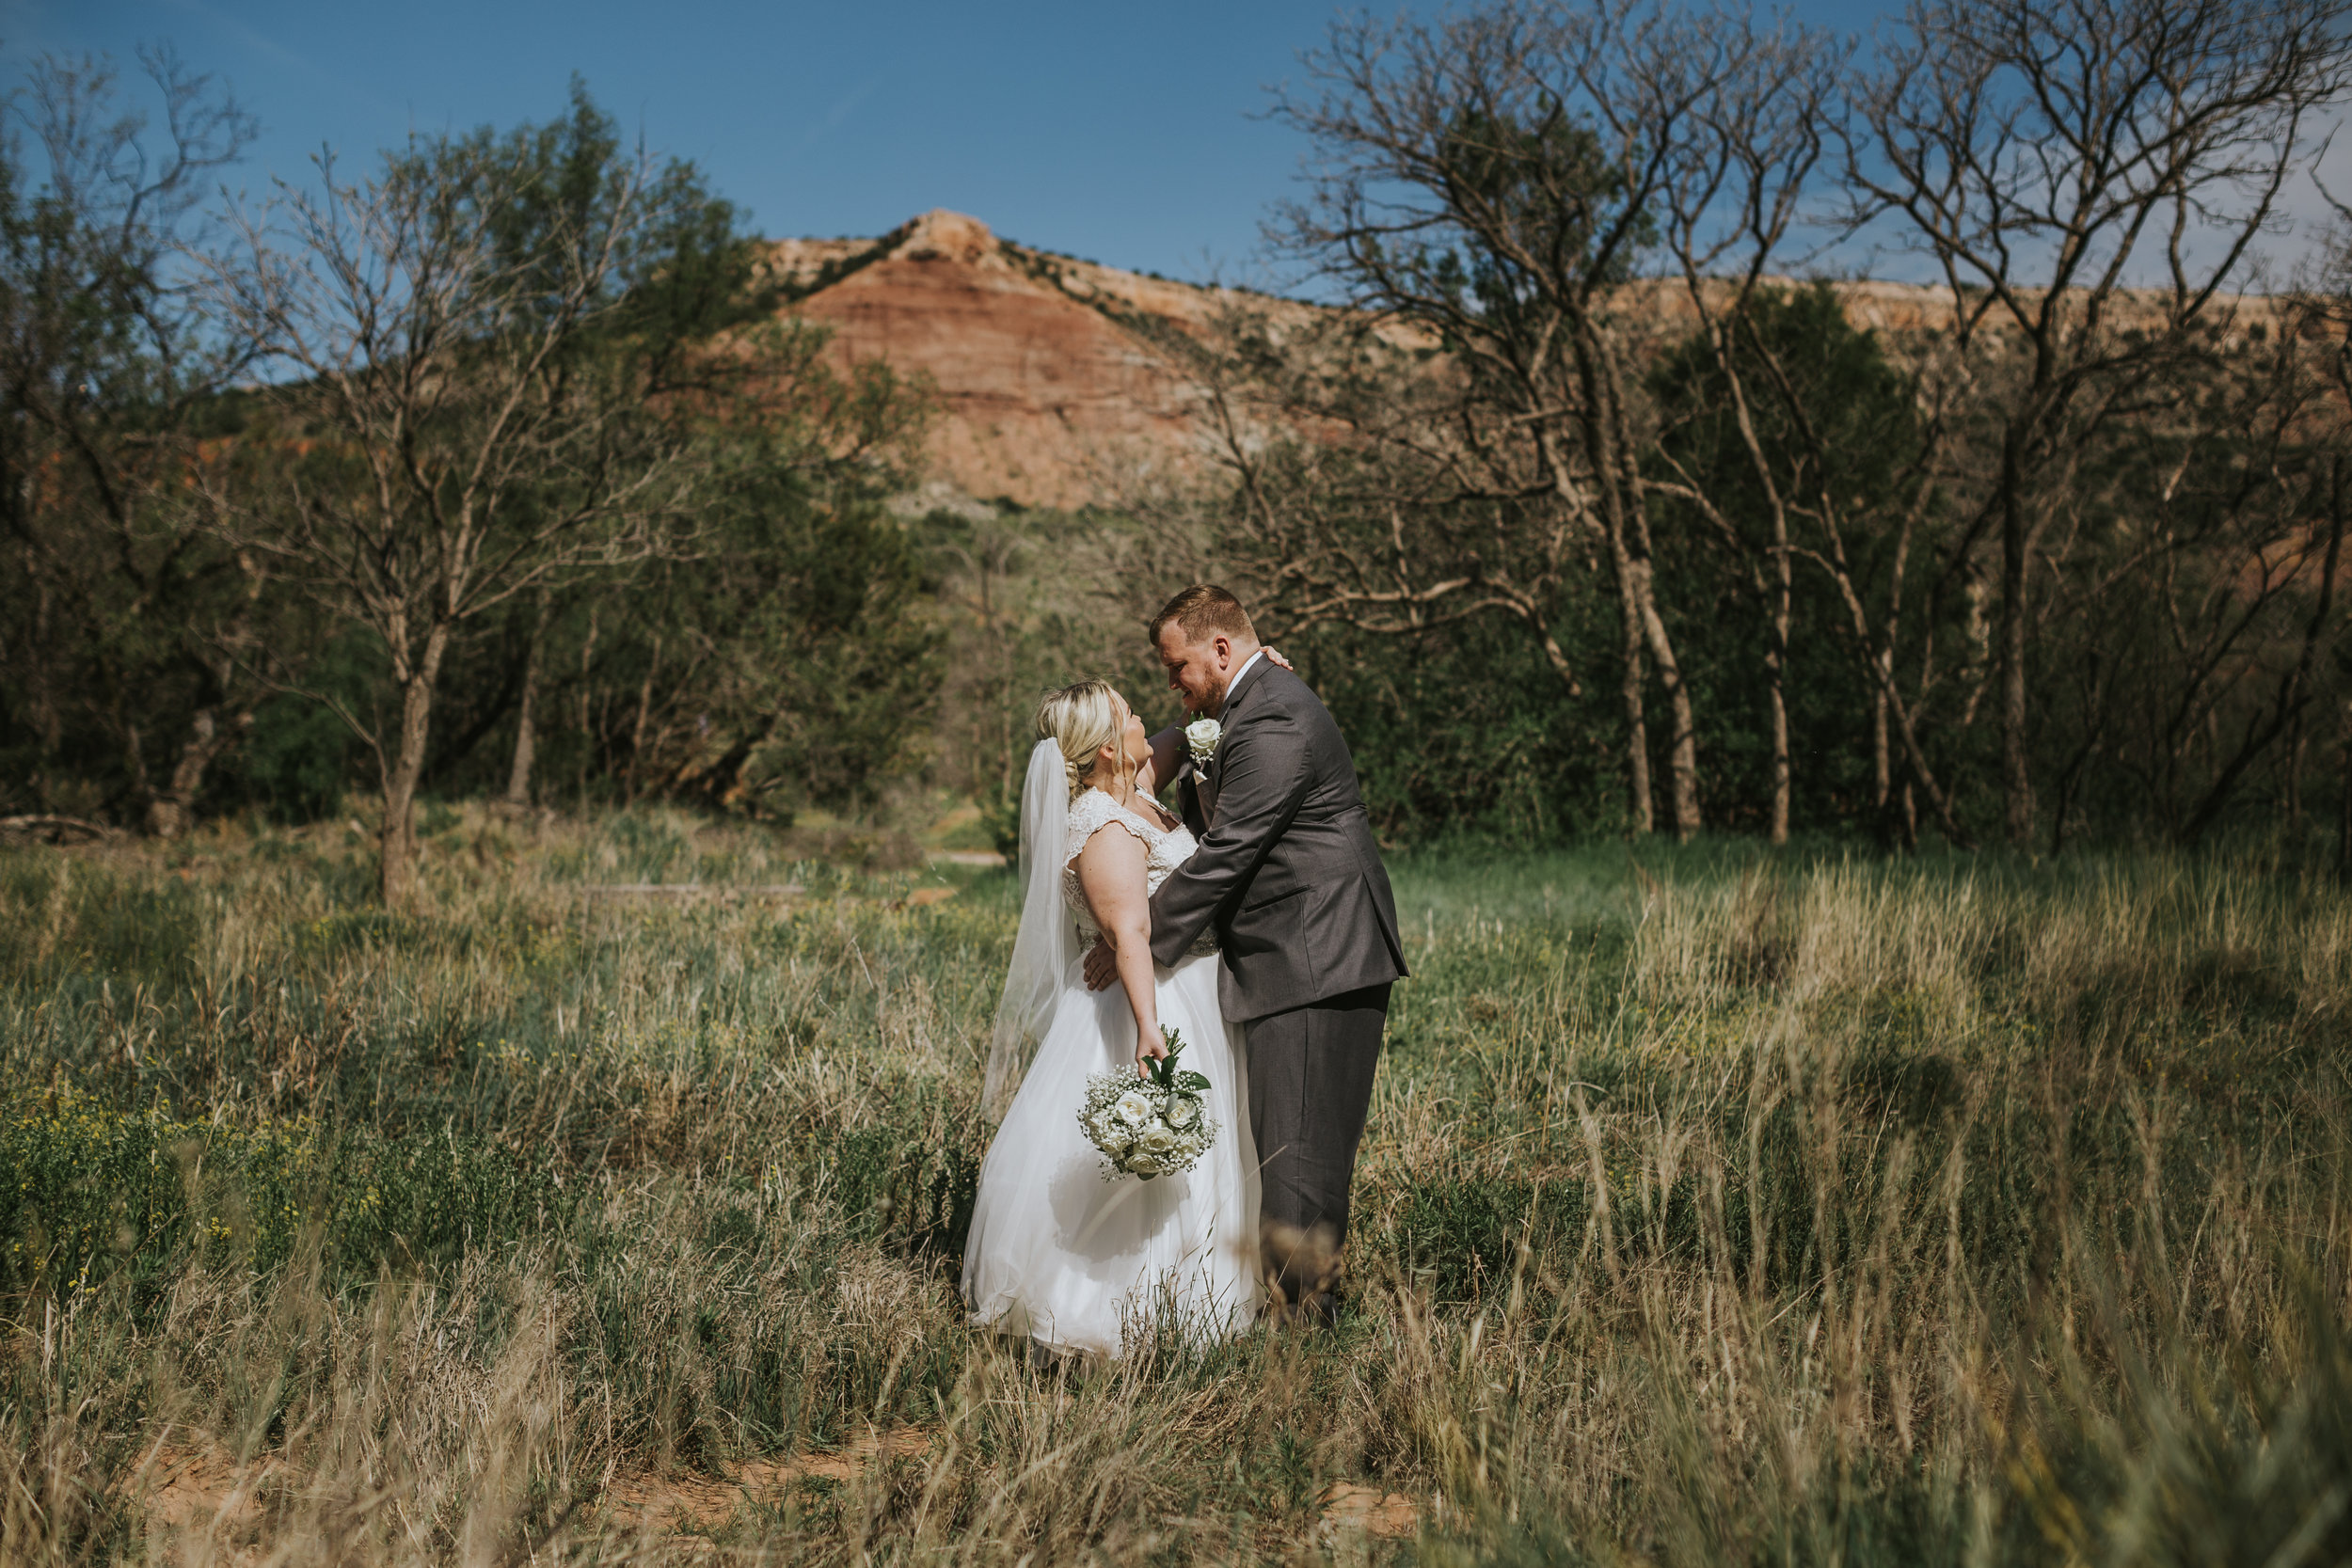  Blue skies against red sandstone rocks this bride and groom share a kiss #tealawardphotography #texasweddings #amarillophotographer #amarilloweddingphotographer #emotionalphotography #intimateweddingphotography #weddingday #weddingphotos #texasphotographer #inspiredwedding #intimatewedding #weddingformals #bigday #portraits 